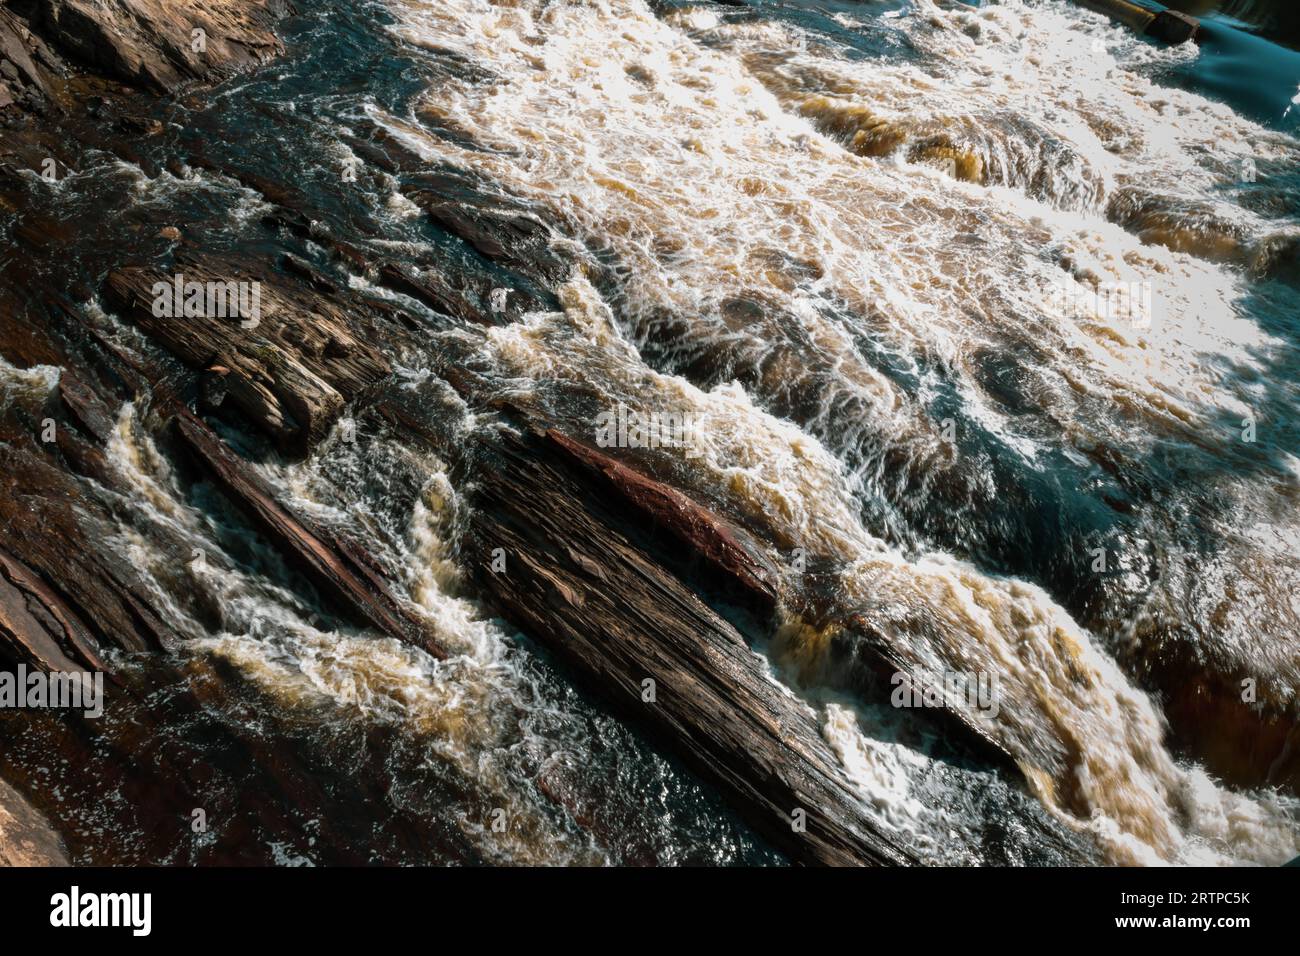 Rapids run over shale rock, layers revealed by scouring water Stock Photo